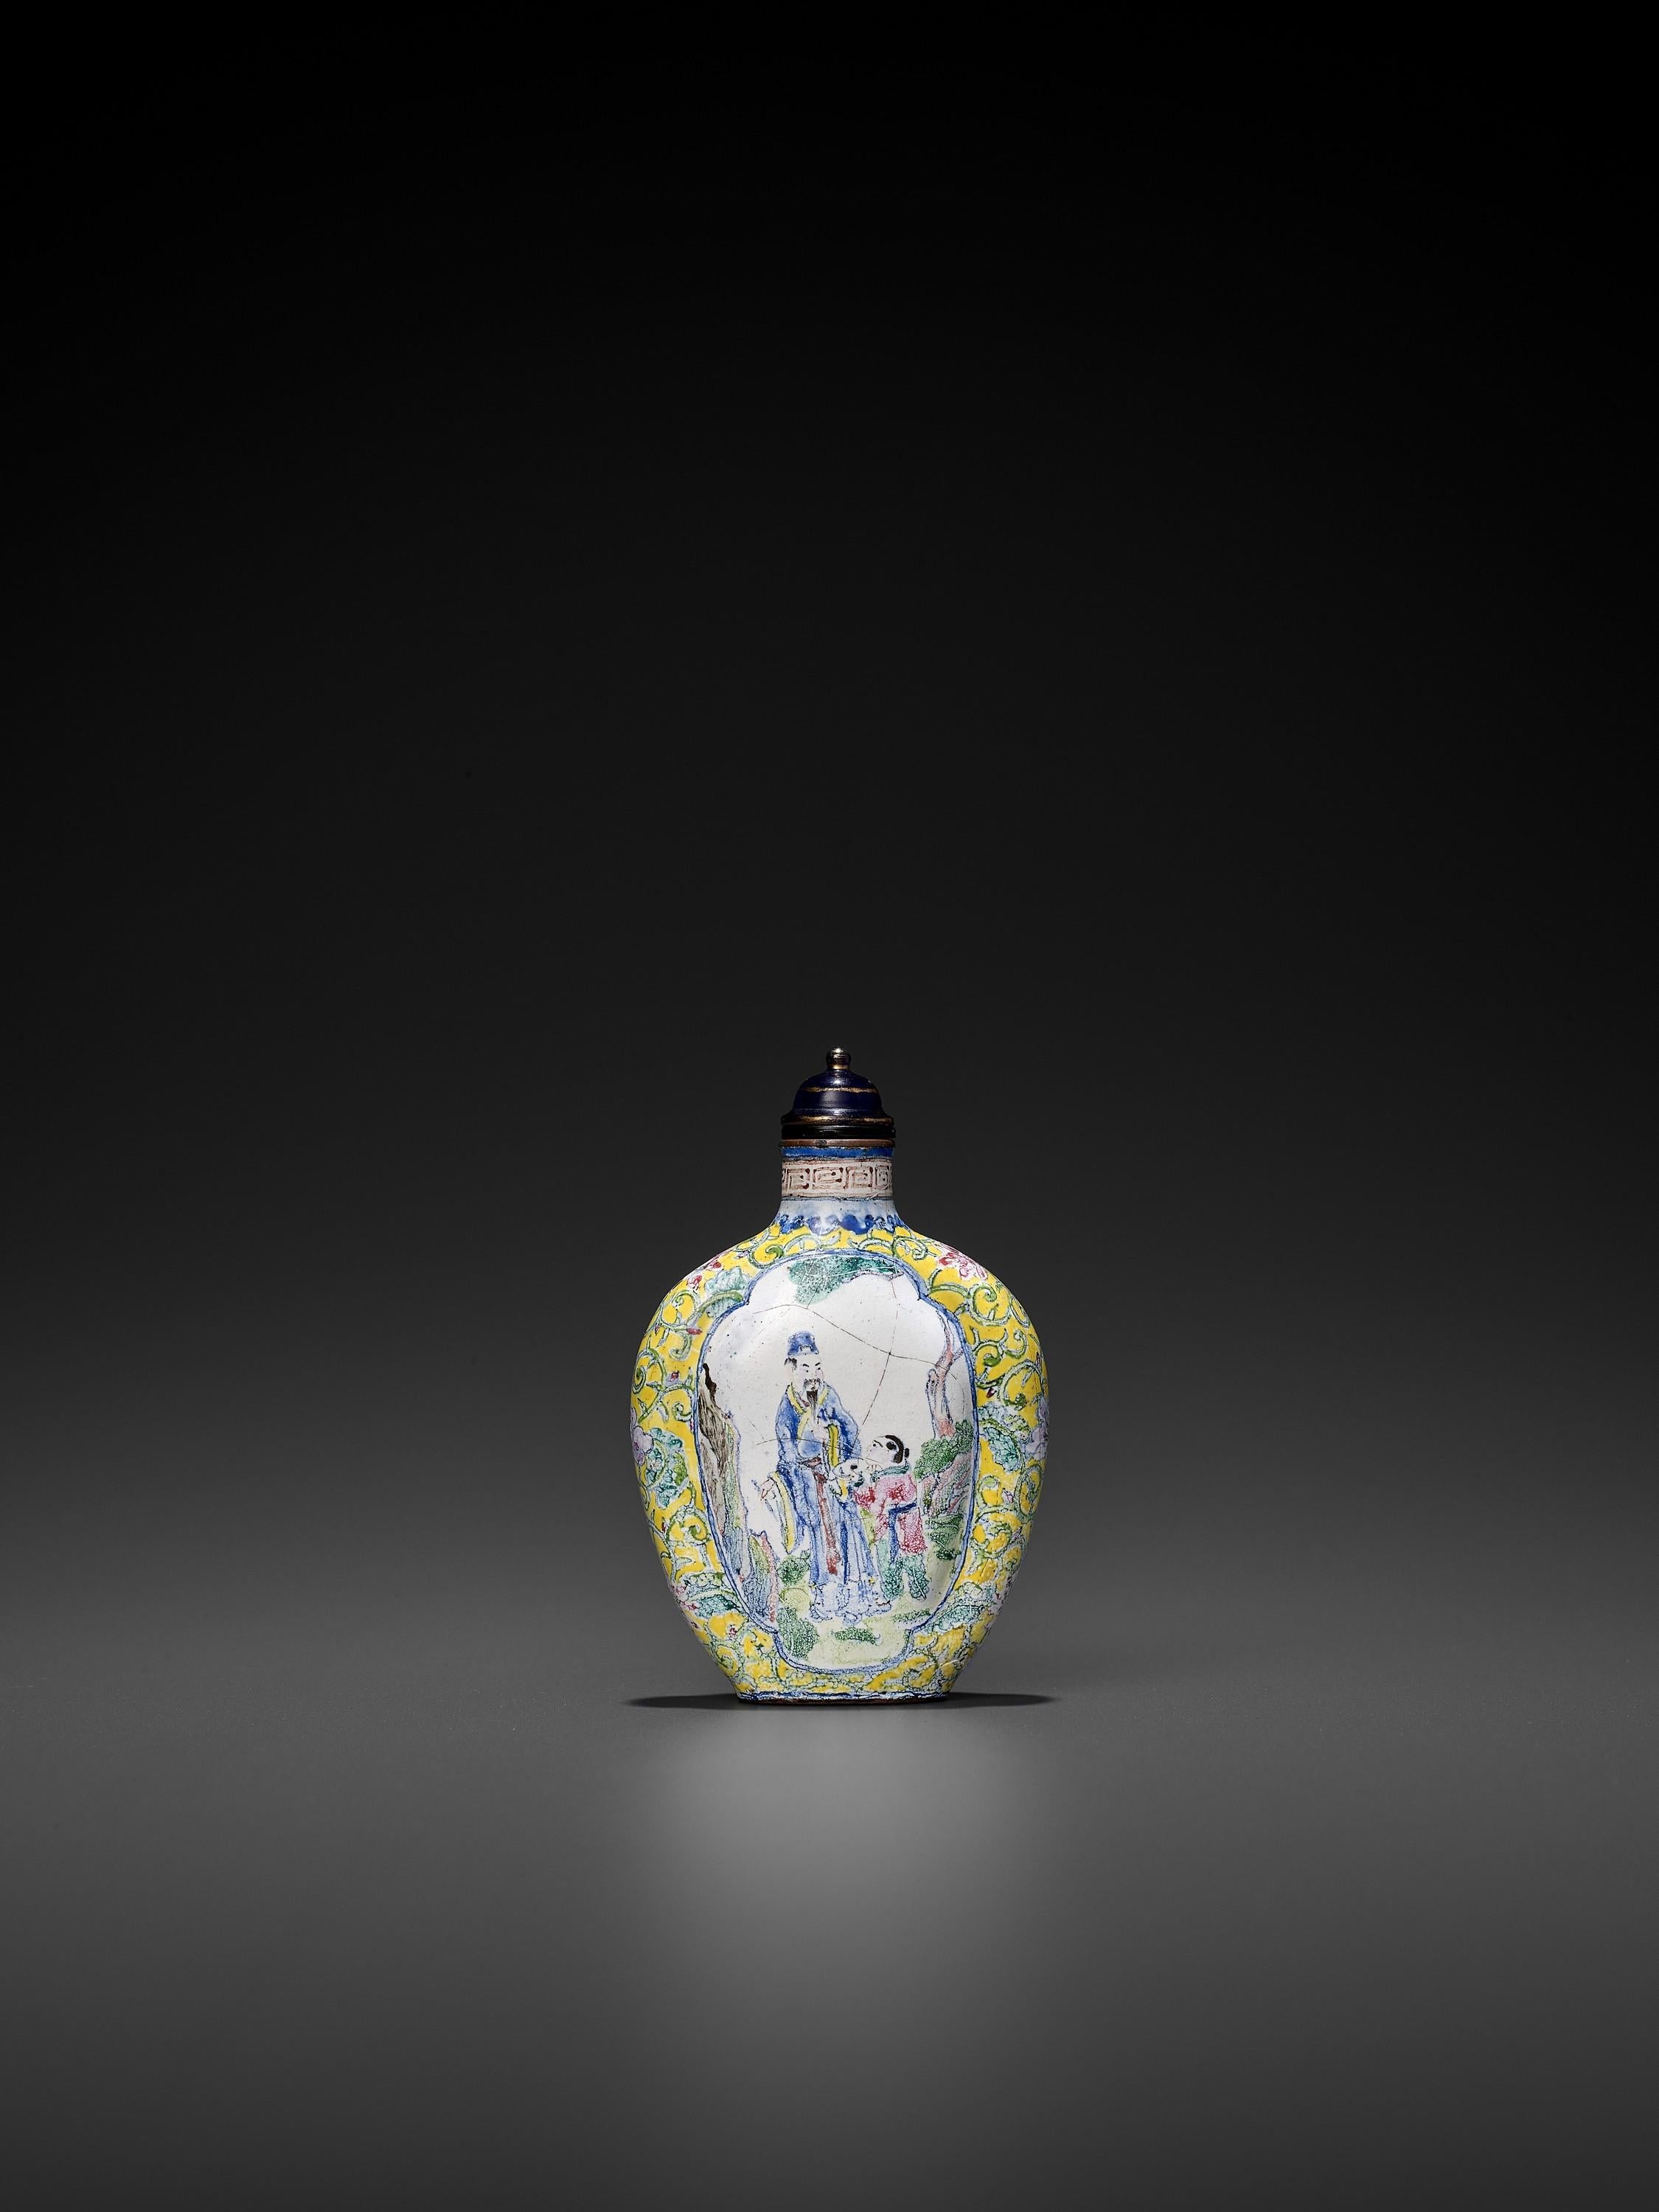 Canton enamel snuff bottle, China, Qing Dynasty, 1644-1912

Four-character seal mark Qianlong nian zhi to base. Each side with a lobed reserve featuring a neatly painted image of a scholar and boy, surrounded by a yellow ground showing floral